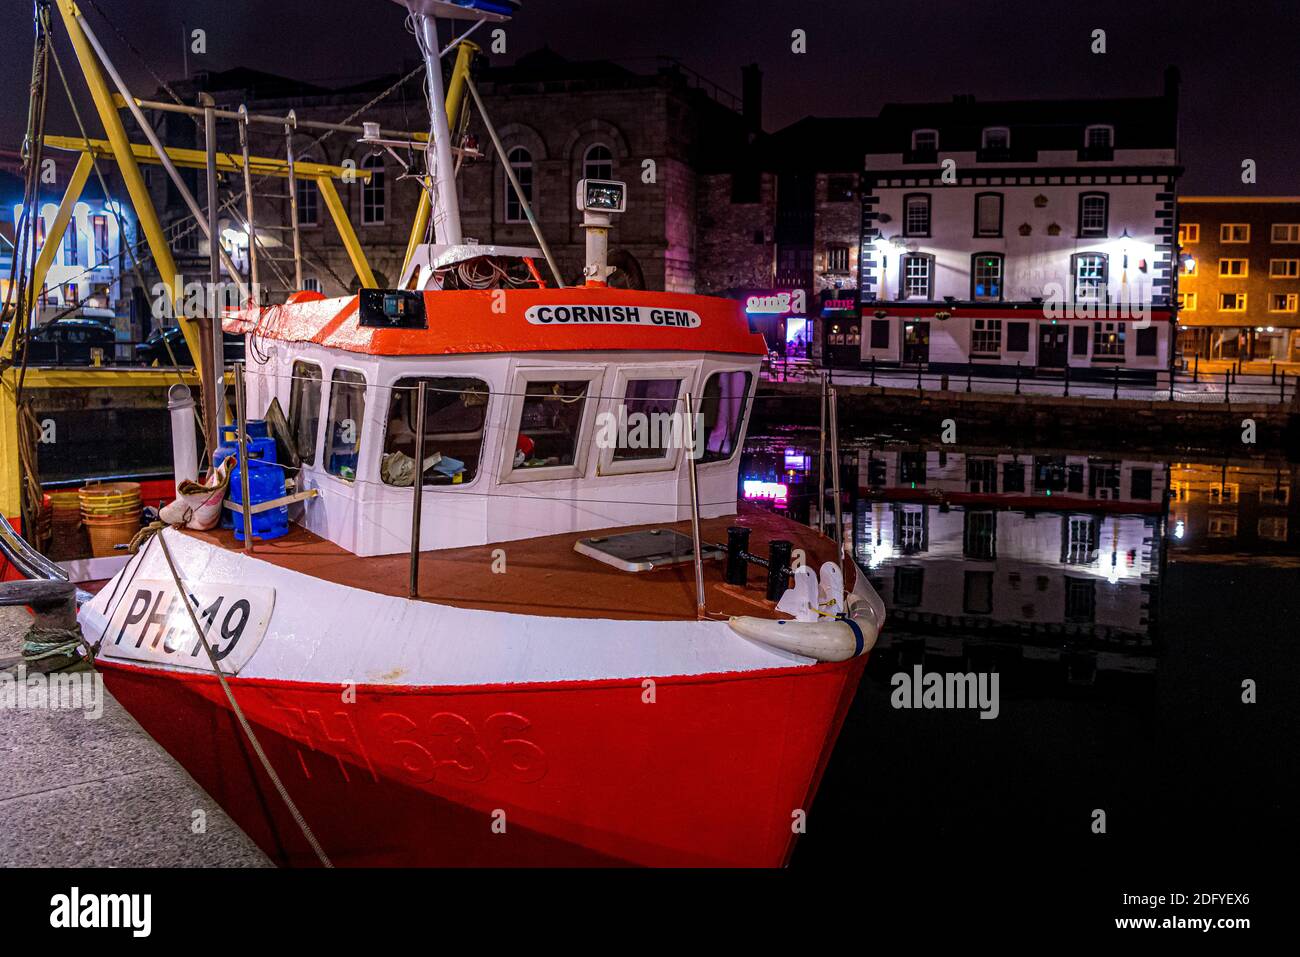 Fishing boat Cornish Gem moored alongside in Sutton Harbour, Plymouth. Stock Photo